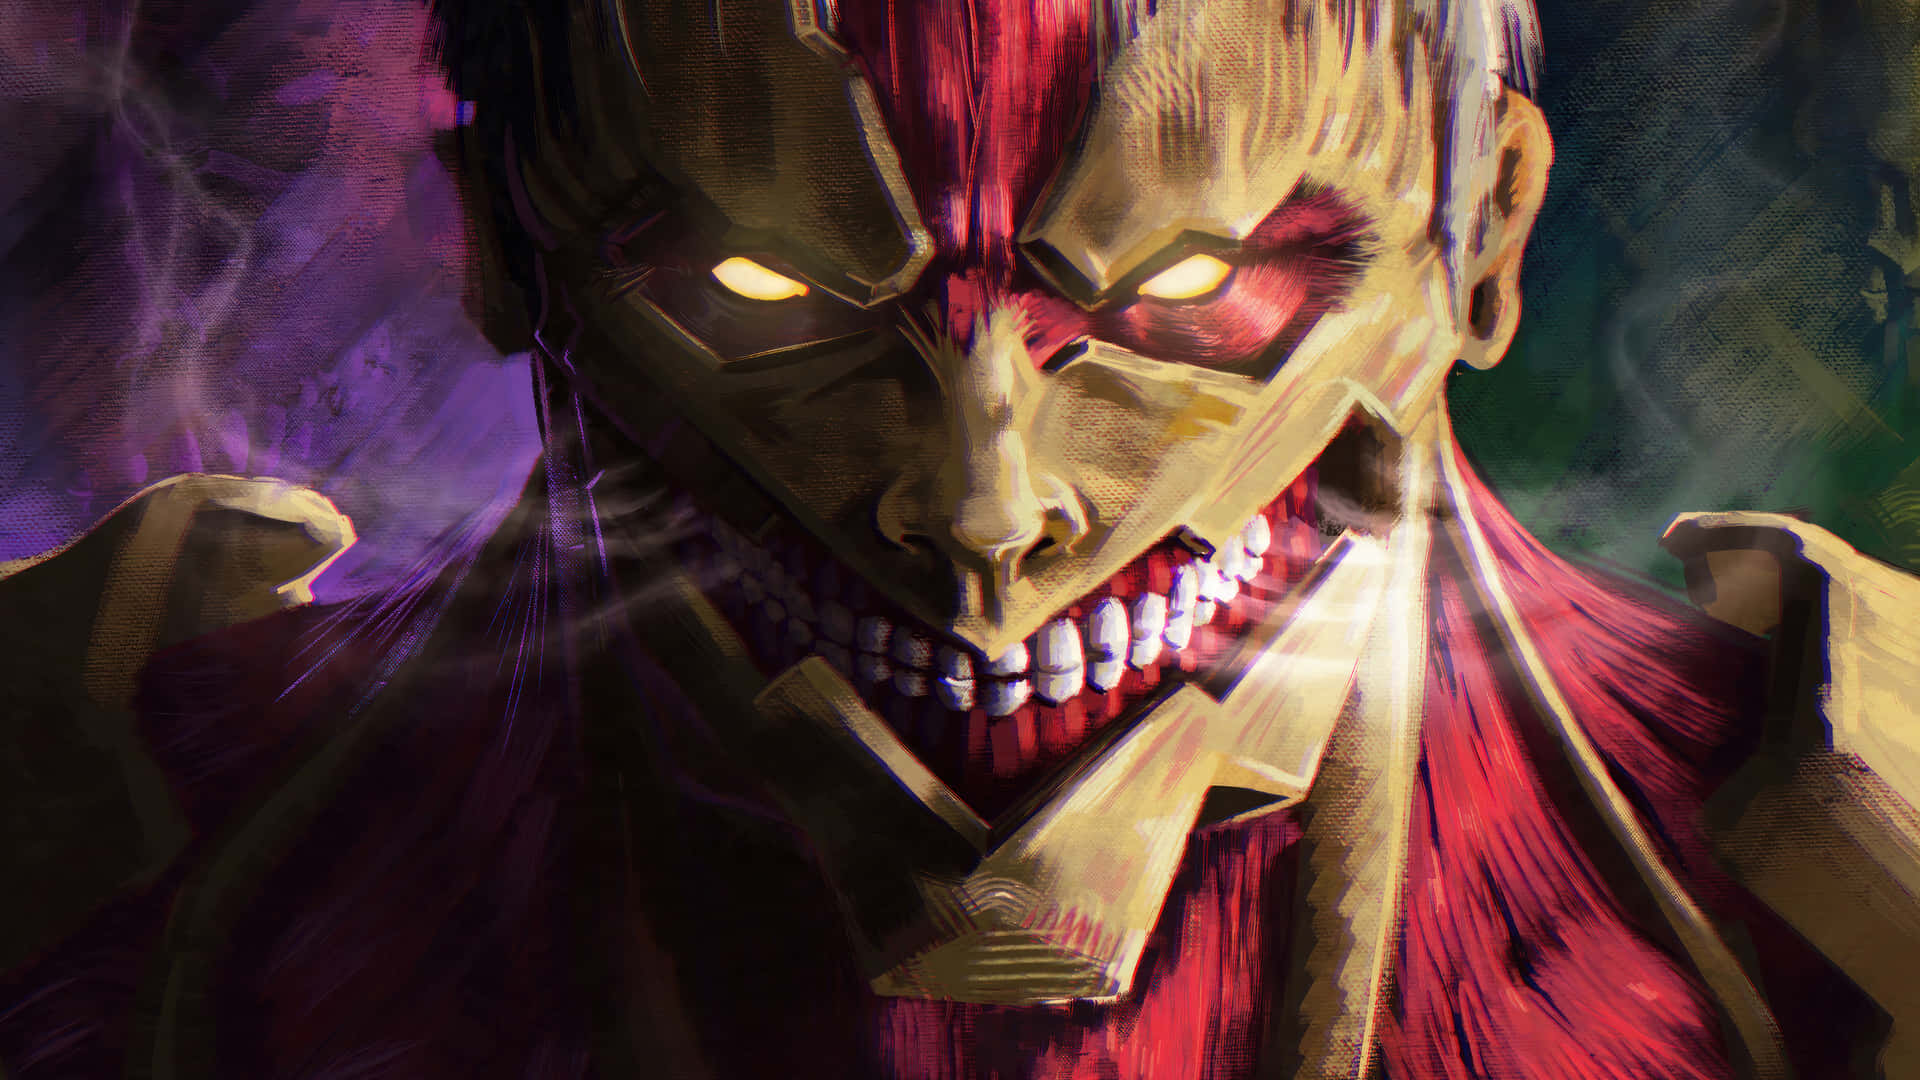 Armored Titan from the hit anime "Attack on Titan" Wallpaper